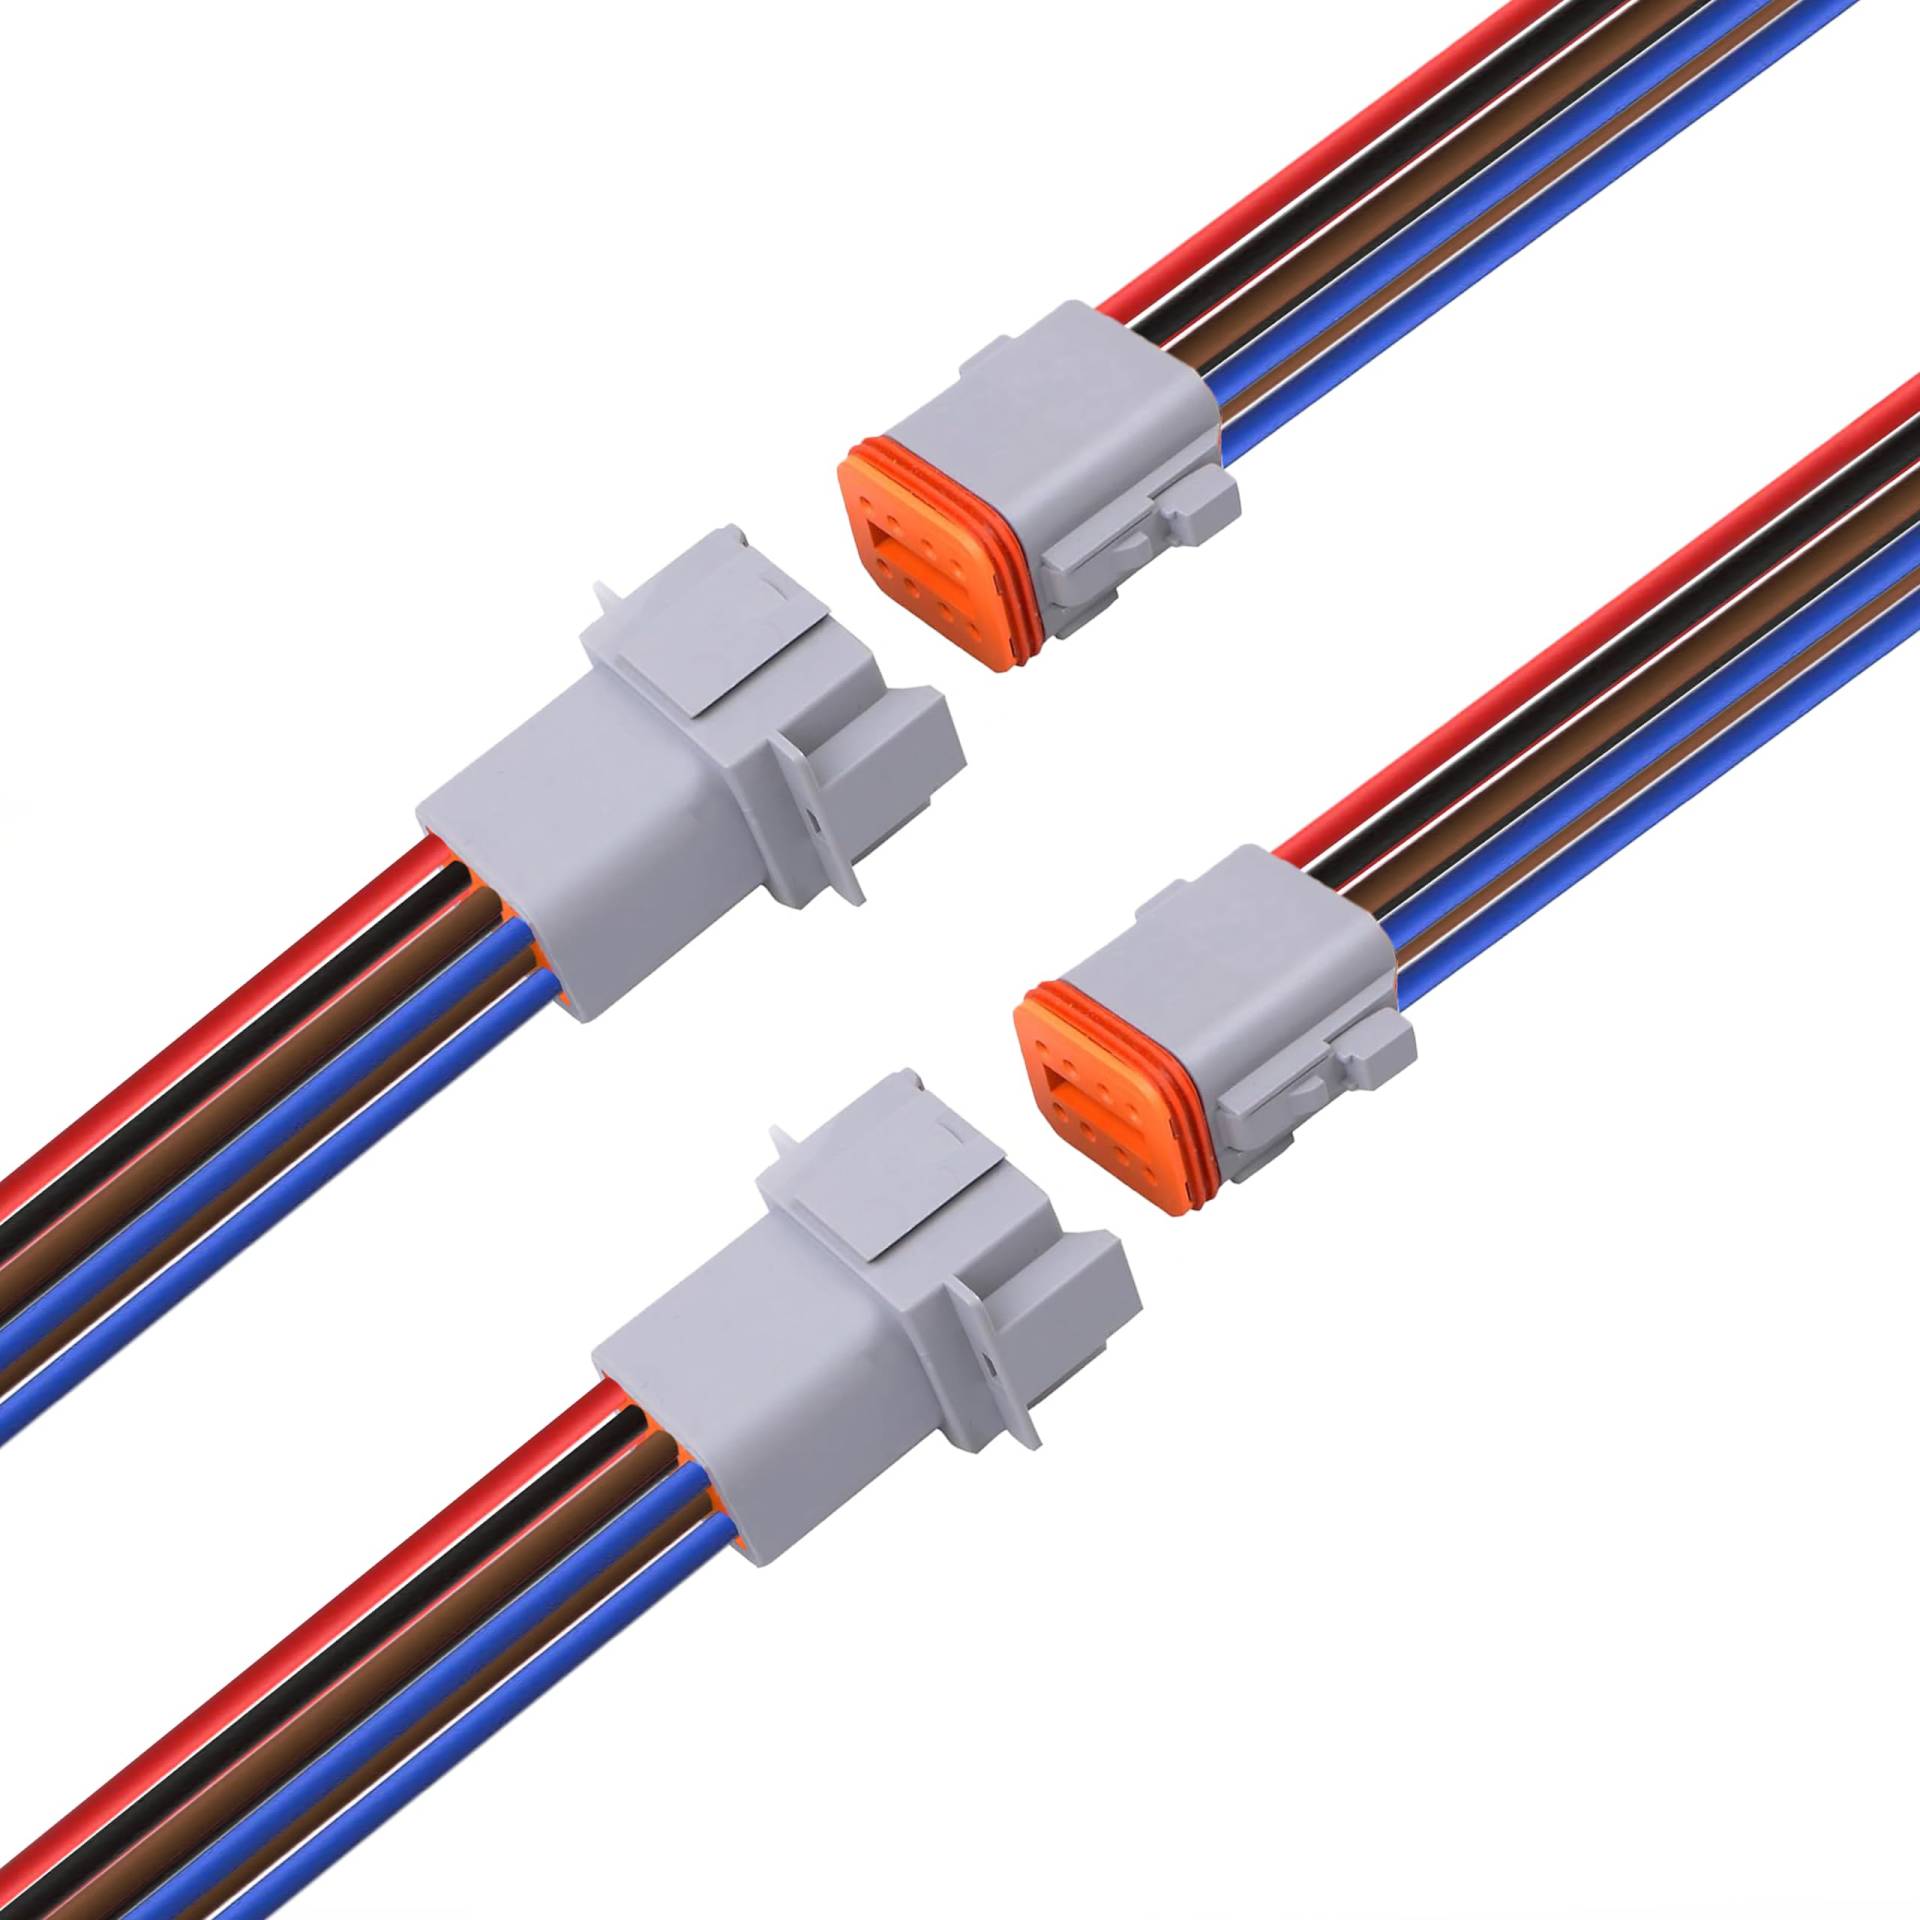 WOODGUILIN 8 Polig Deutsch Connector,DT Automotive Waterproof Electrical Connector 8 Way Male Female Plug Wiring Harness,with 16 AWG Cable Wire,for Car,Truck,Boats,LED Work Light.(2 Pairs,8P DT Gray) von WOODGUILIN